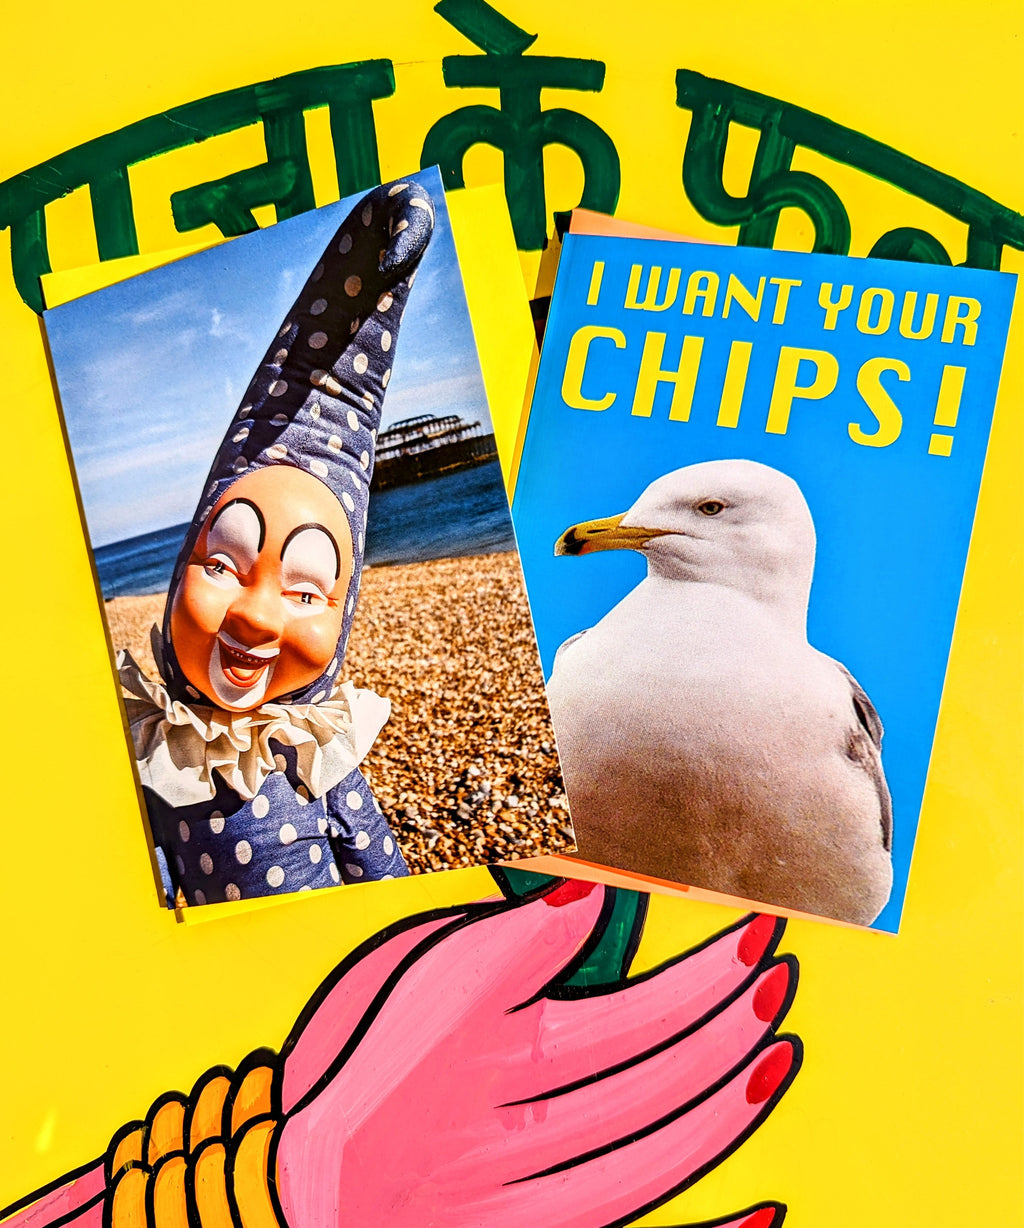 A set of two brilliantly bonkers Brighton greetings cards by lovely Brighton makers Bite Your Granny.

Set of 2 cards

Cards come with coloured envelopes
